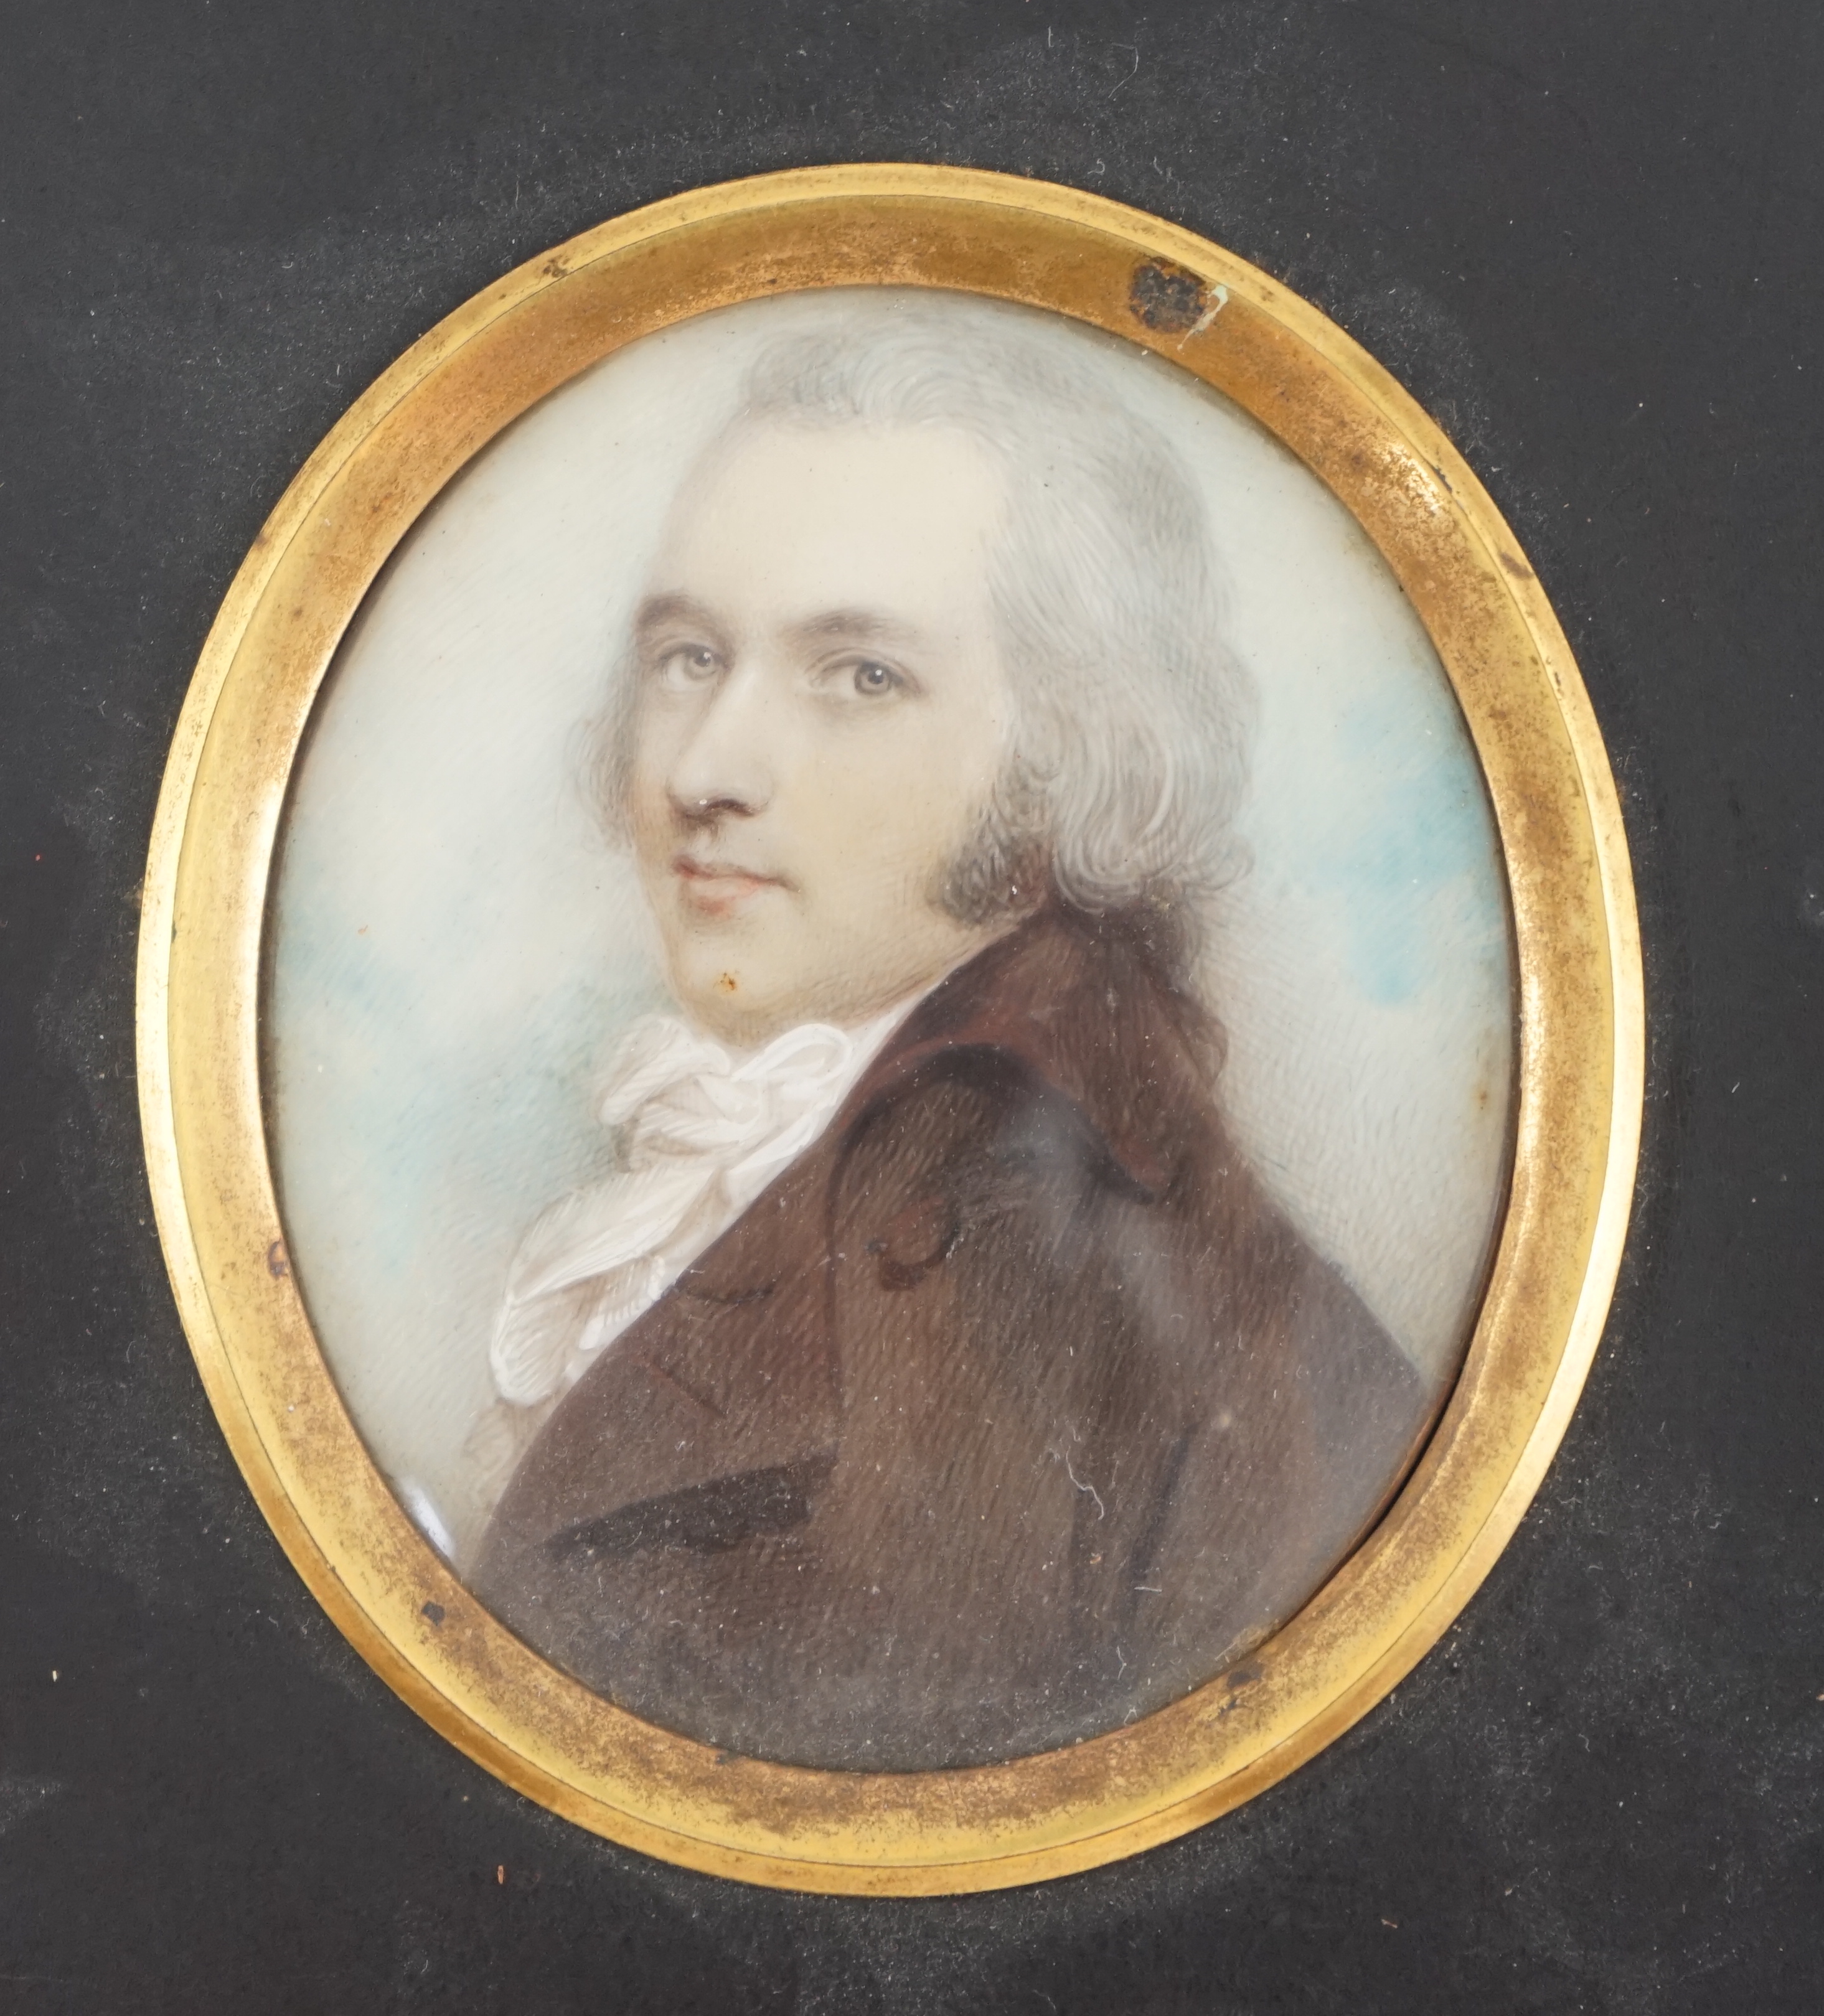 Attributed to Andrew Plimer (1763-1837), Portrait miniature of a gentleman, watercolour on ivory, 6.5 x 5.5cm. CITES Submission reference PSNJZWJ5